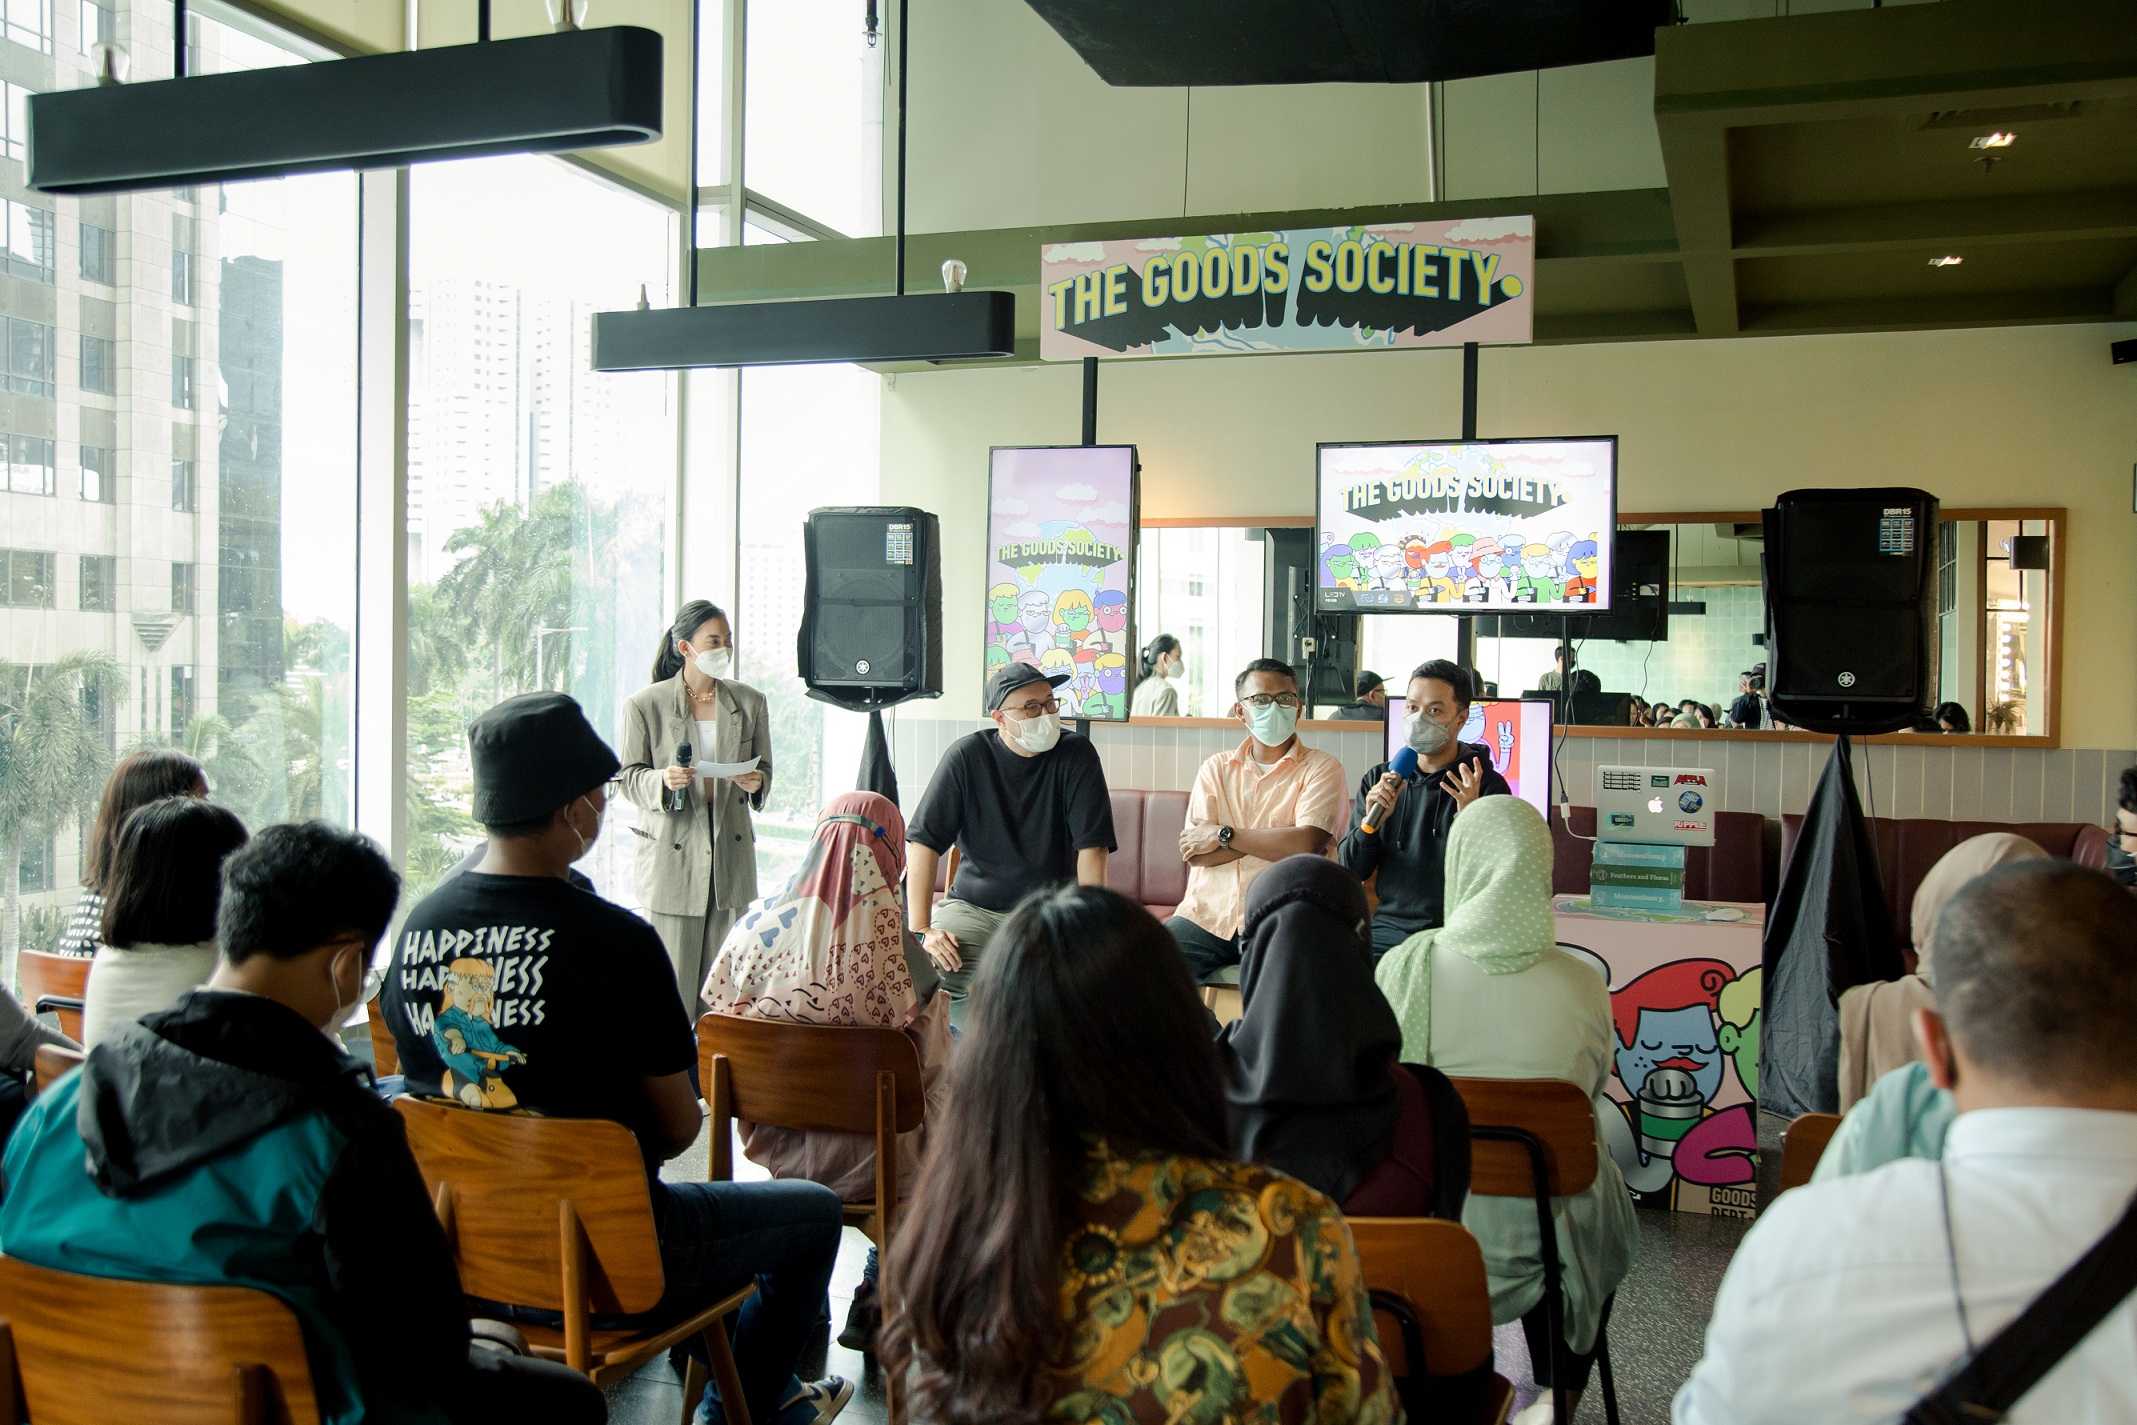 The Goods Dept Luncurkan The Goods Society